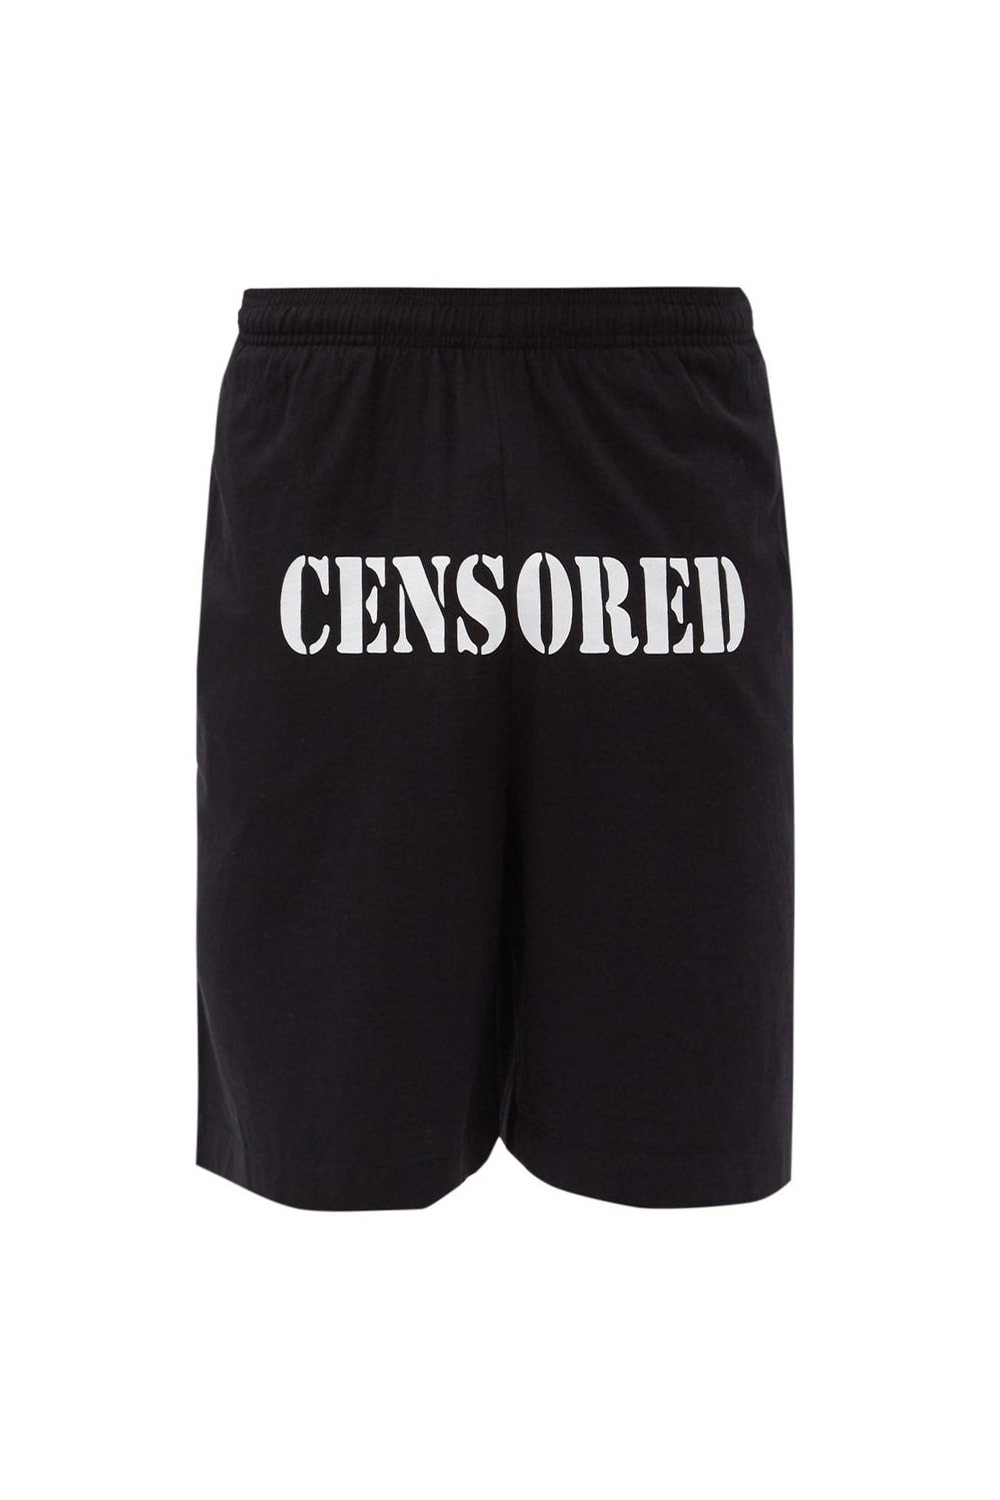 VETEMENTS Censored-Print Cotton-Jersey Shorts Release Info matchesfashion details AW20 FW20 collection